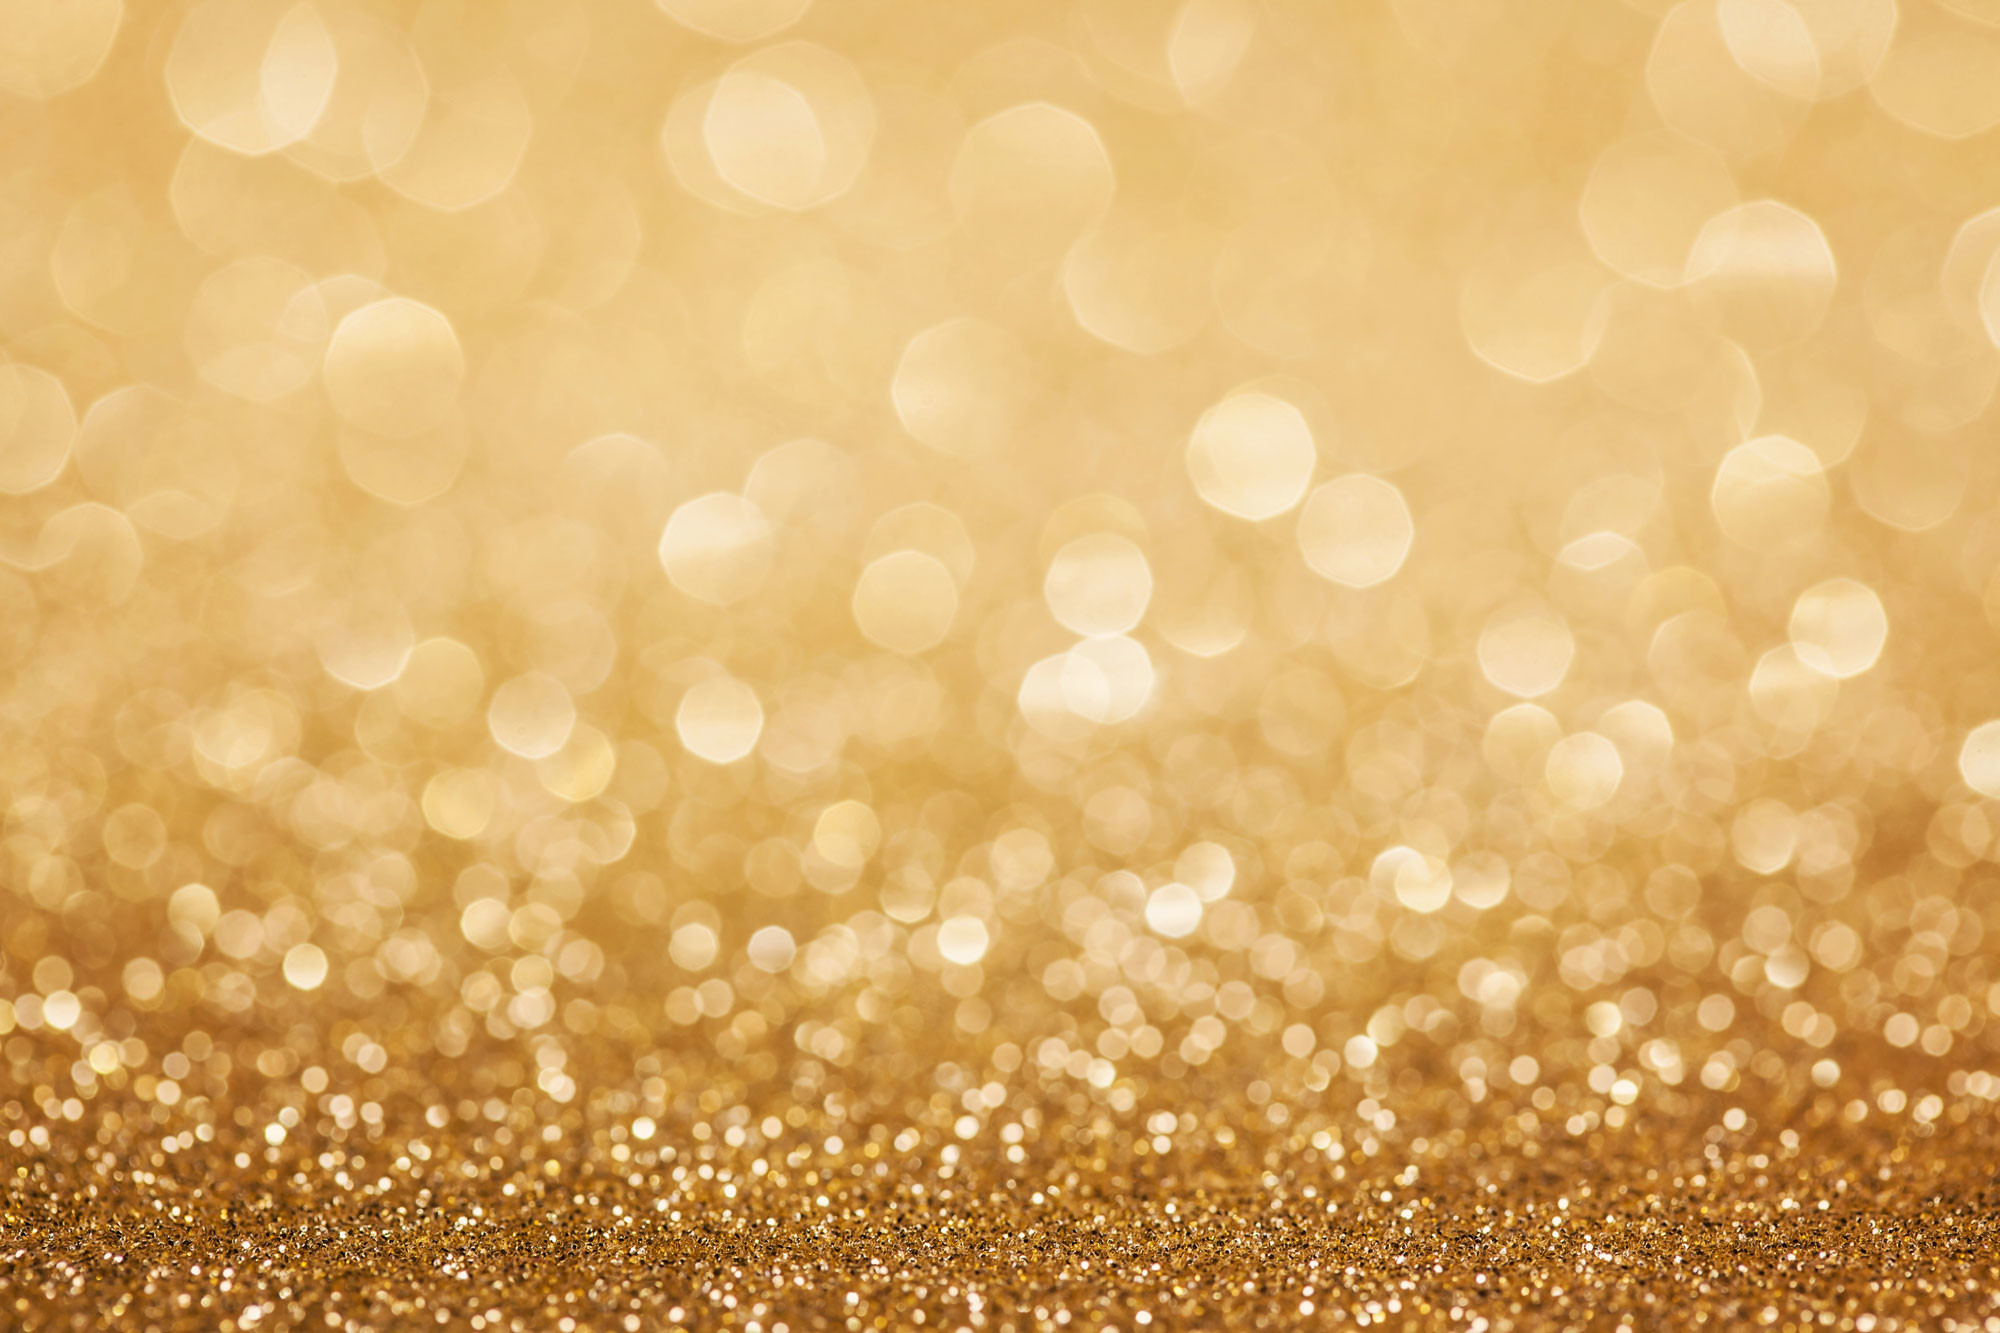 Explore and share Gold Glitter Background Wallpaper on WallpaperSafari